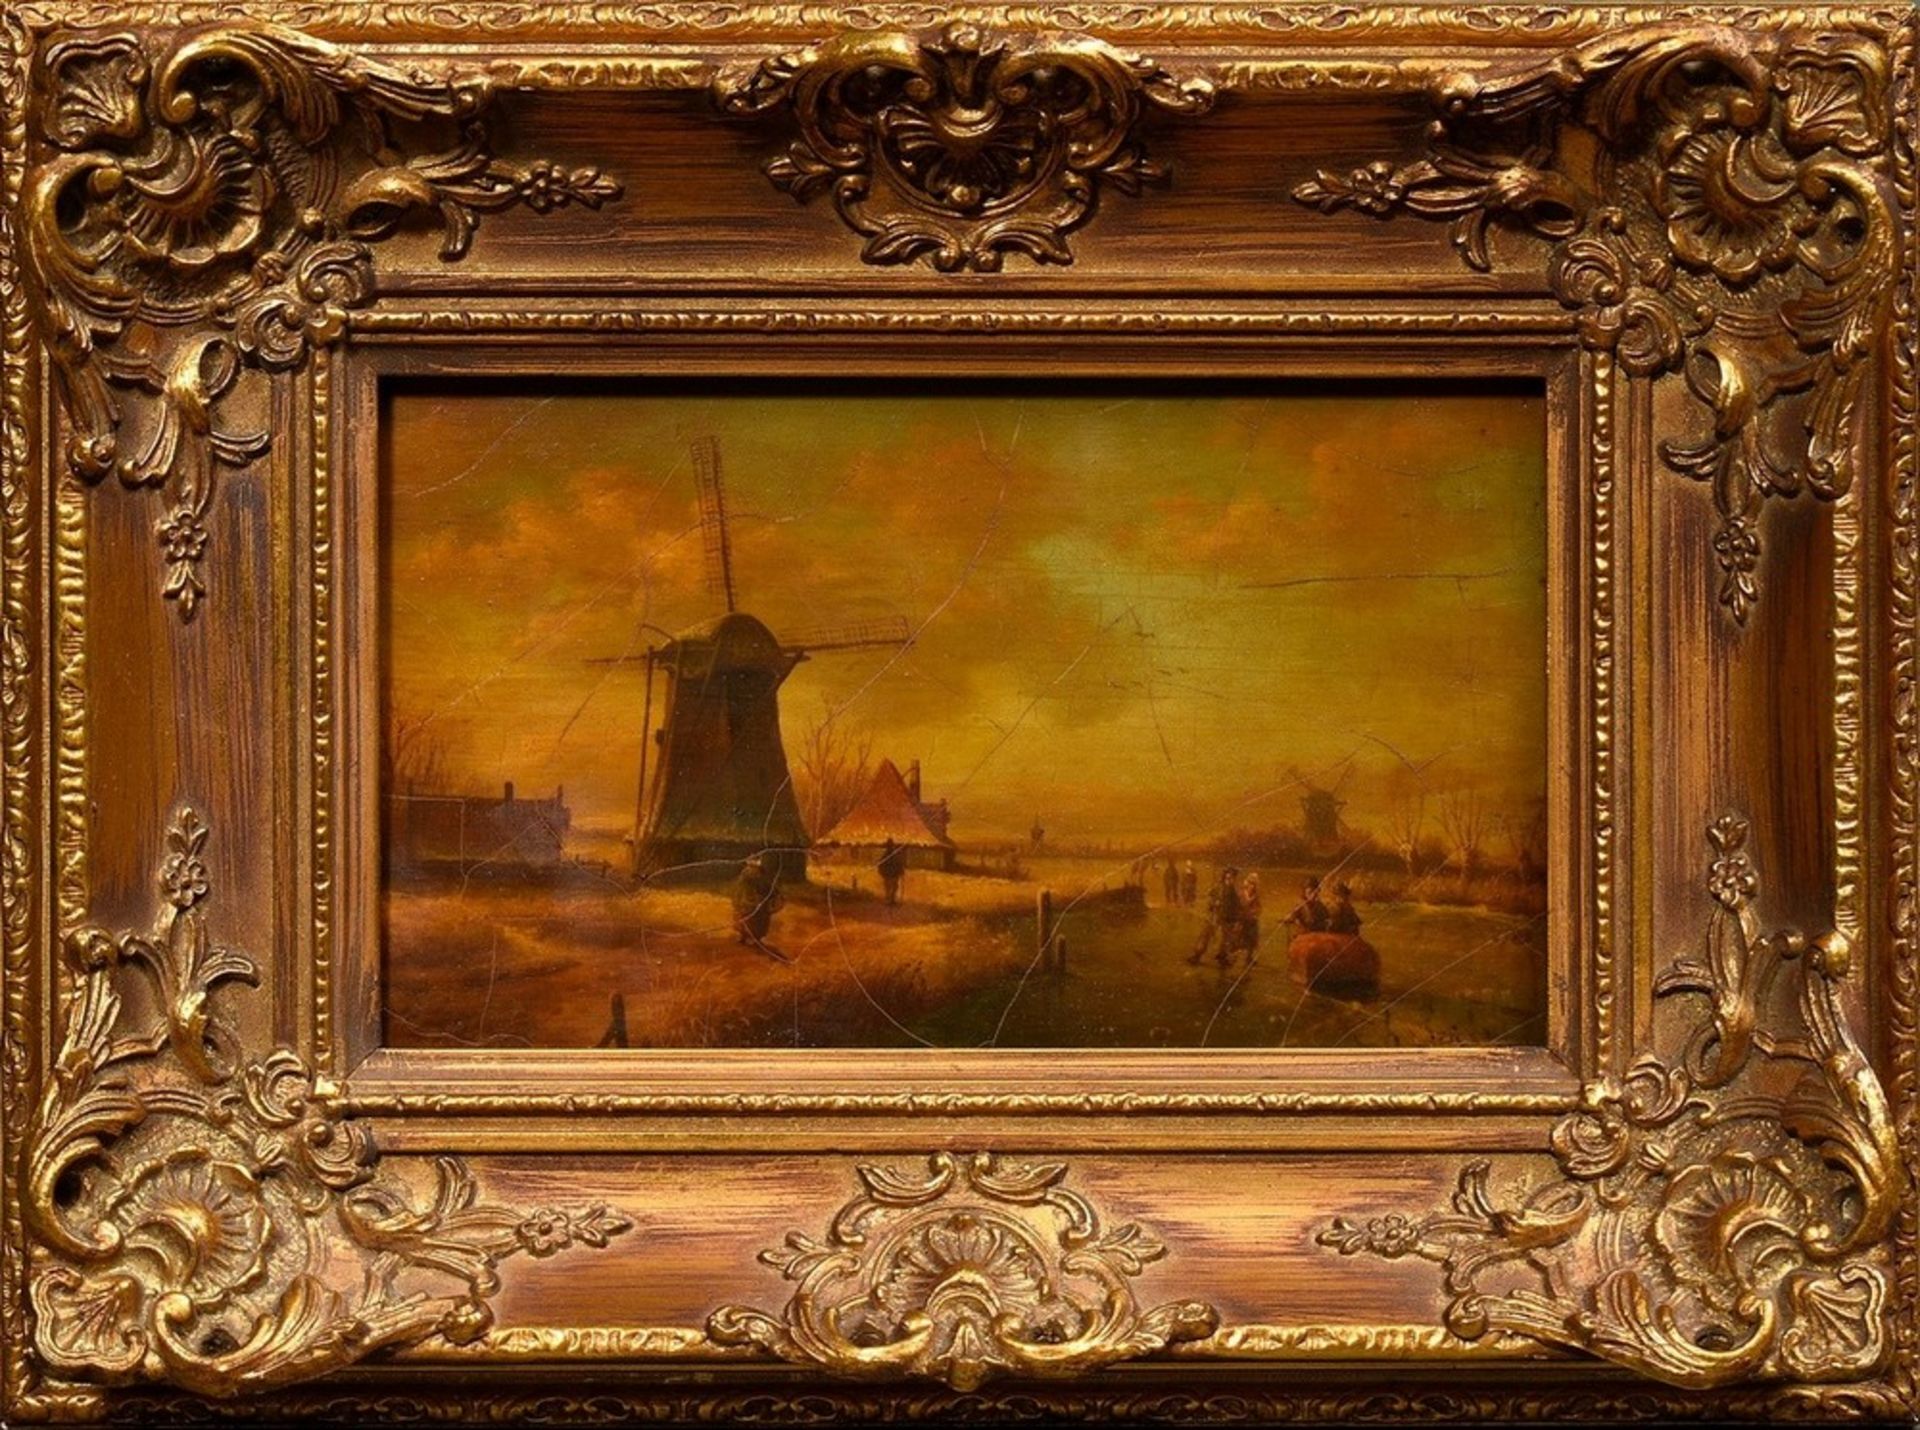 Unknown artist of the 18th c., "Winter landscape with river and mills", oil/wood, b.r. unclearly si - Image 2 of 5